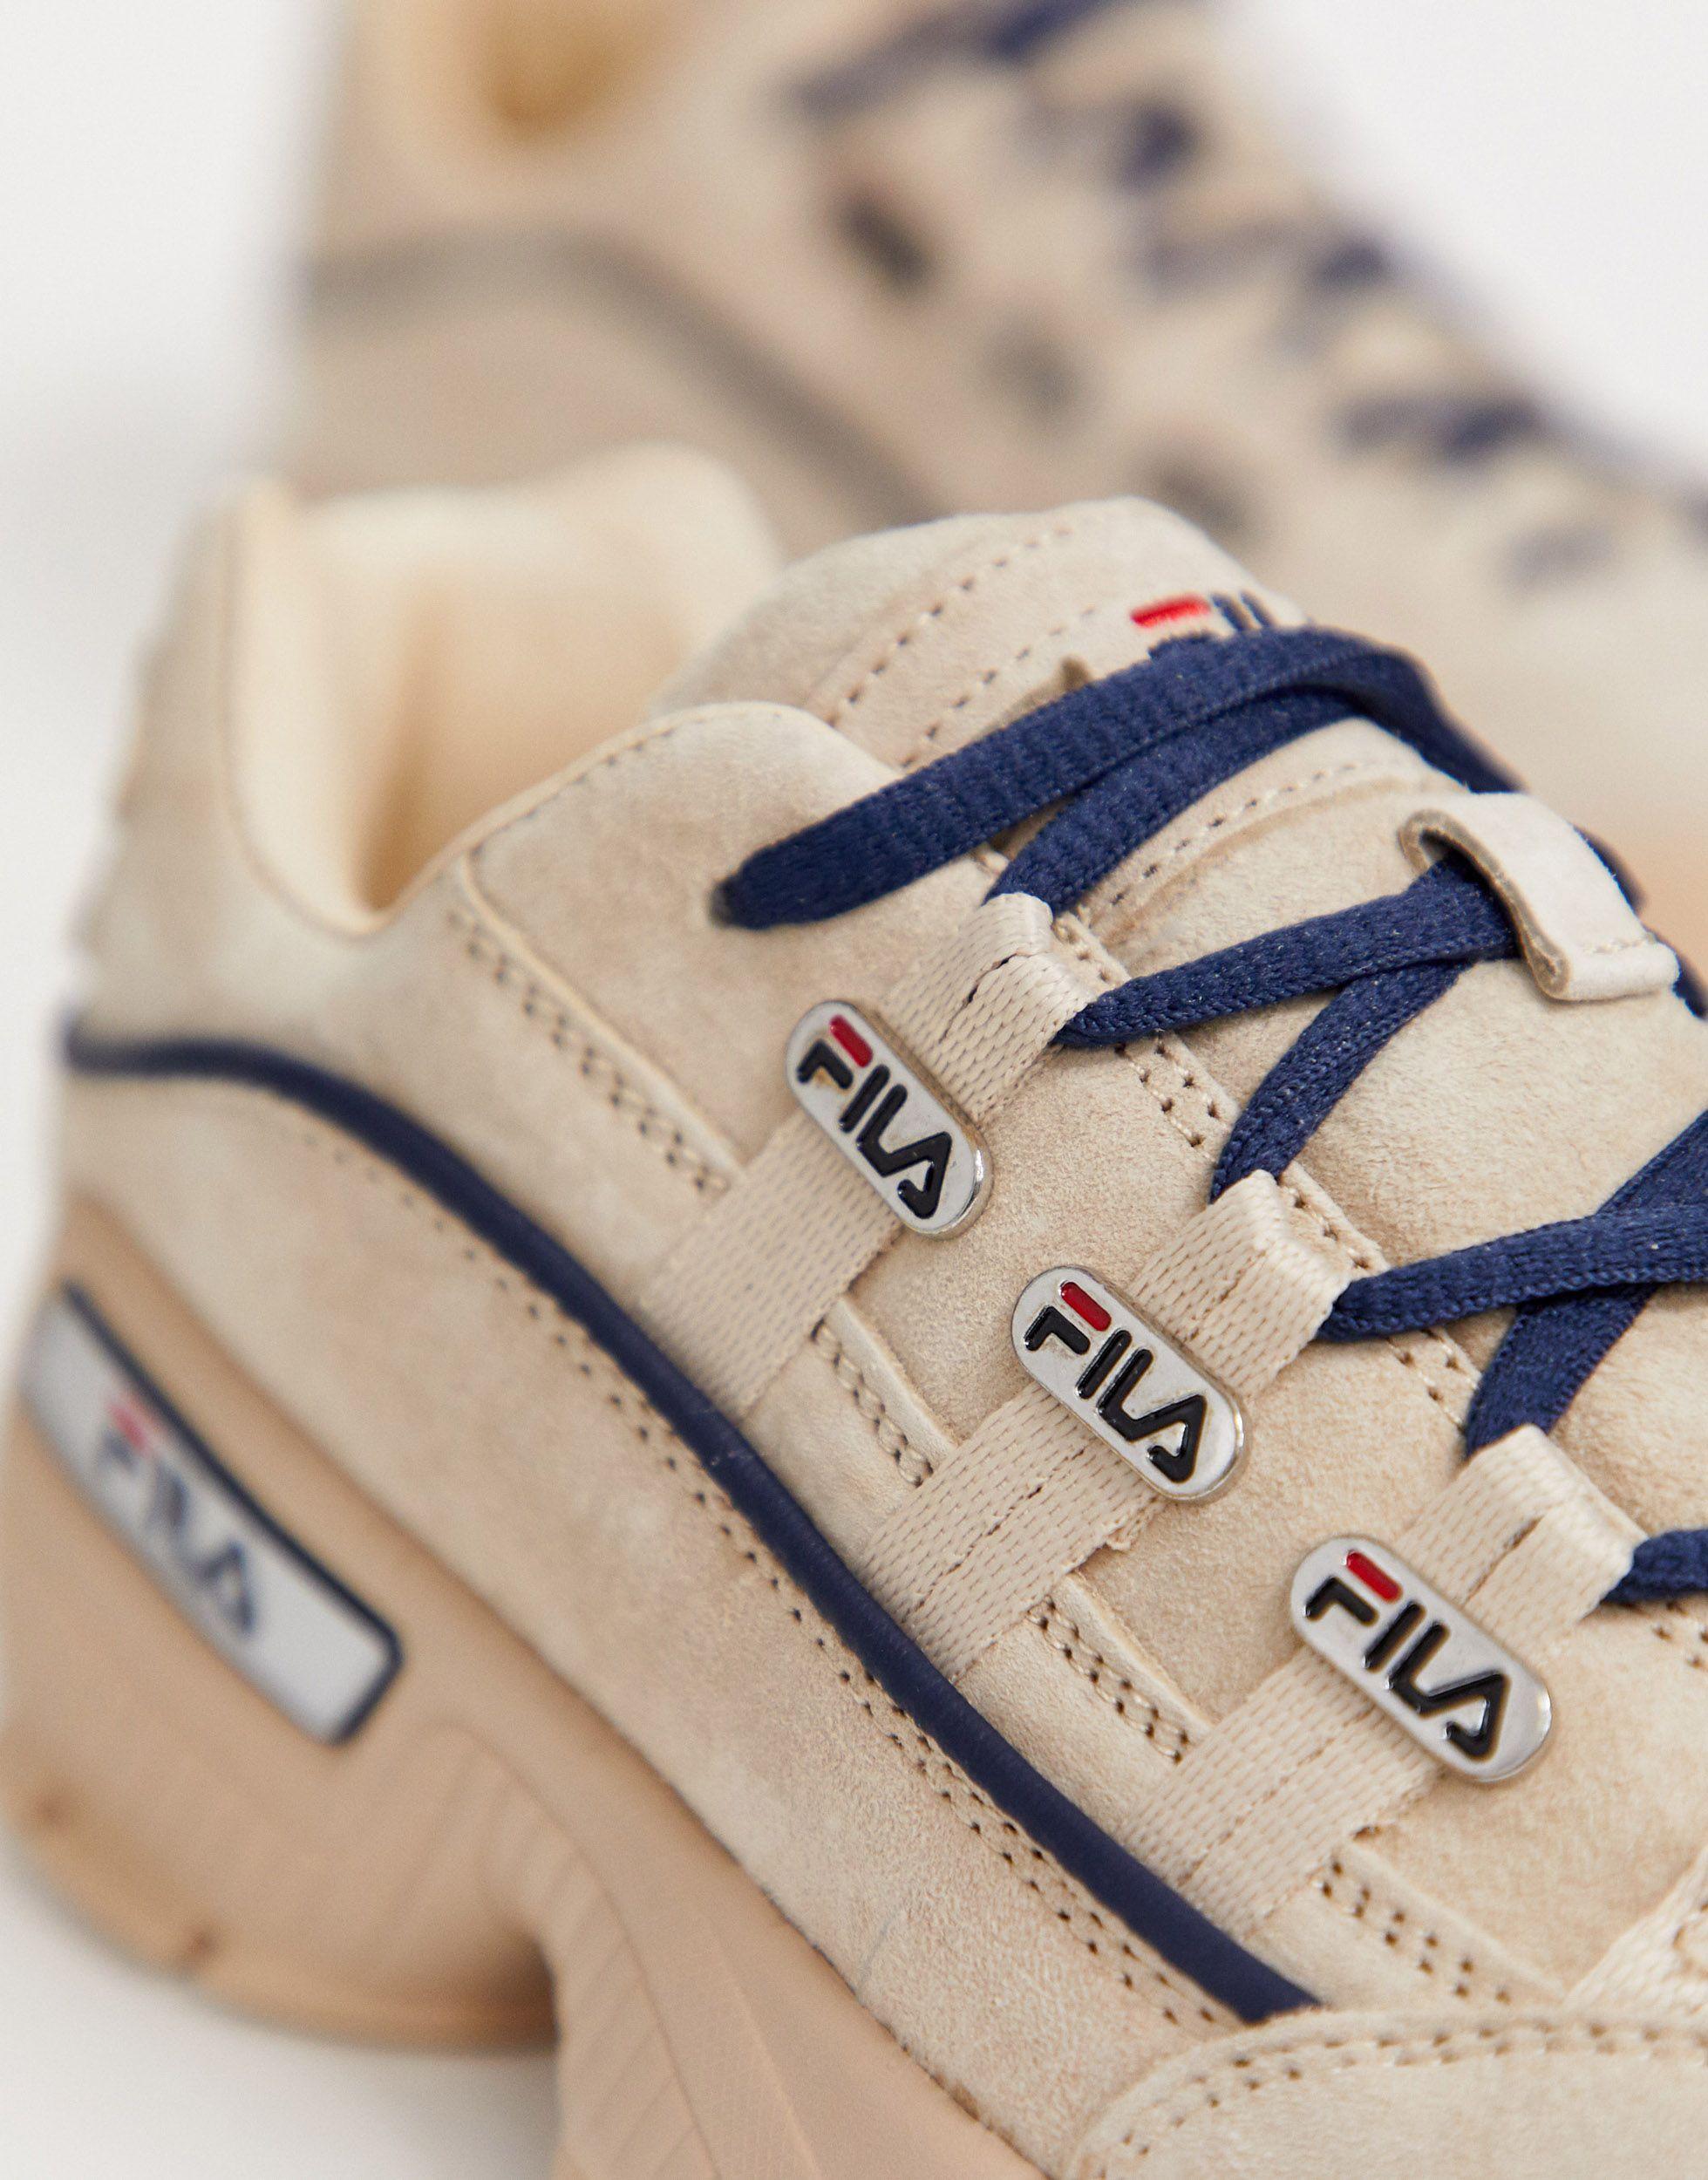 Fila Hometown Luxe Cream Trainers Cheapest Selling, 63% OFF |  cinemadearte.com.br